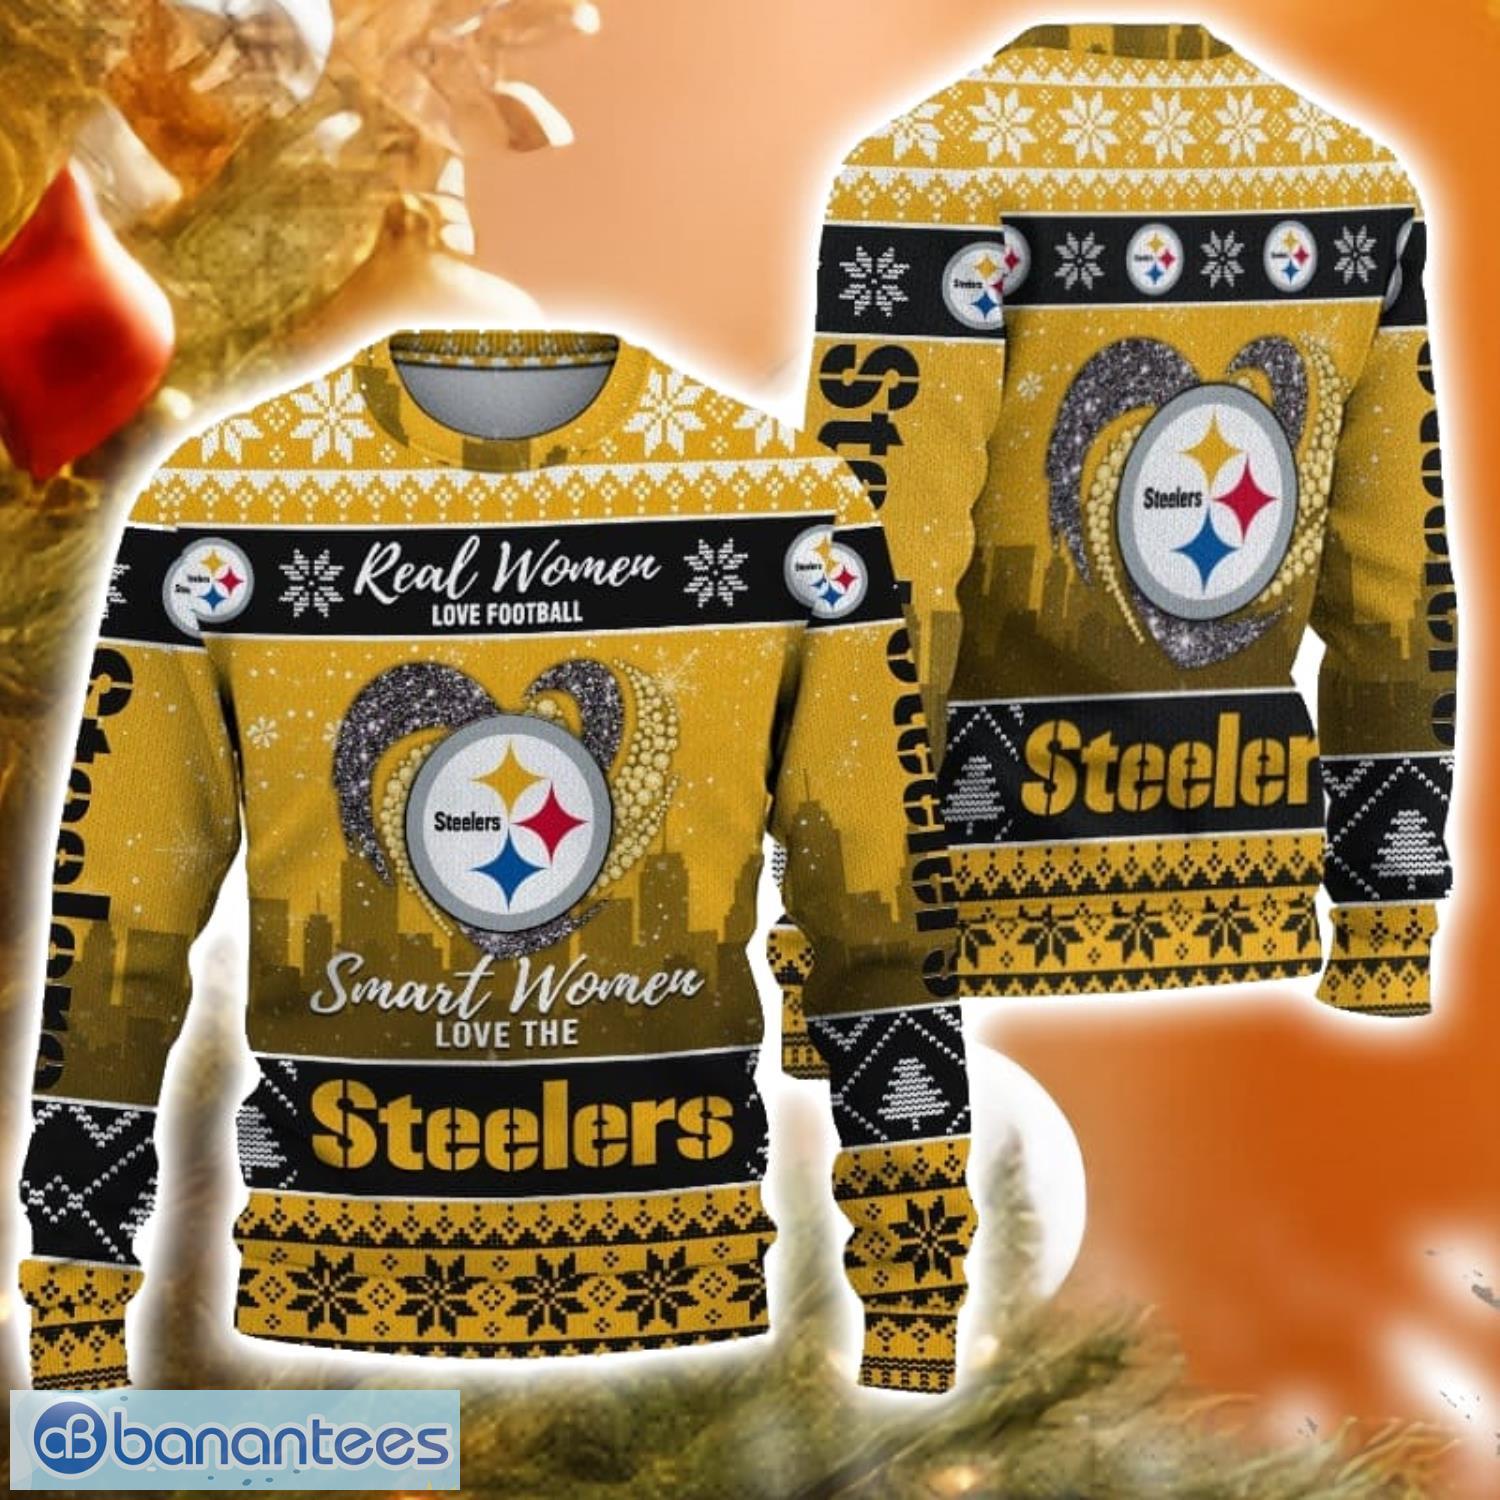  Steelers Inspired Gifts Perfect For Family On Fathers